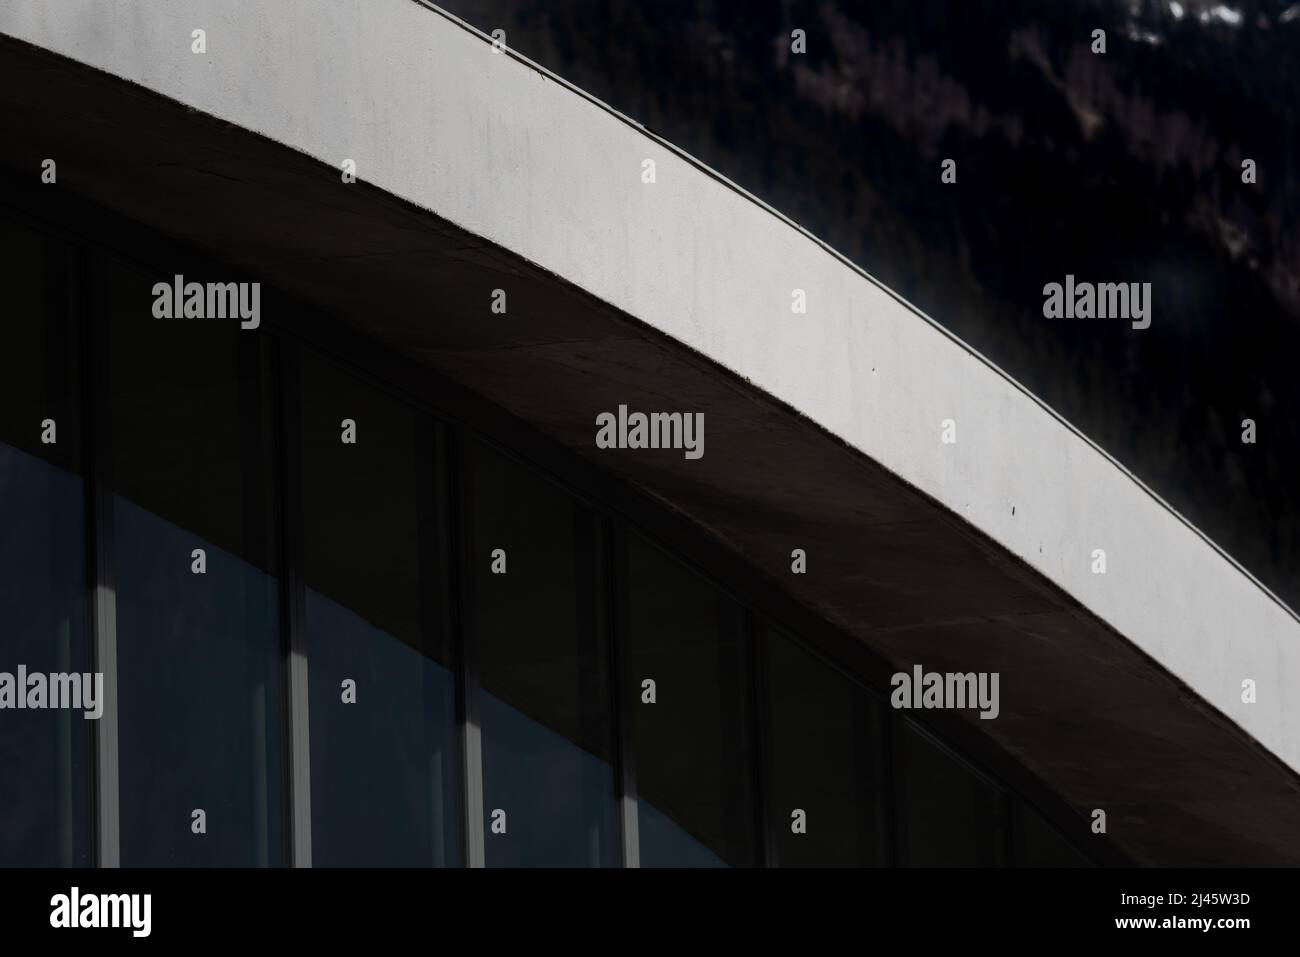 Architecture detail of arched white concrete rooftop beam sloping down over glass and aluminium facade Stock Photo